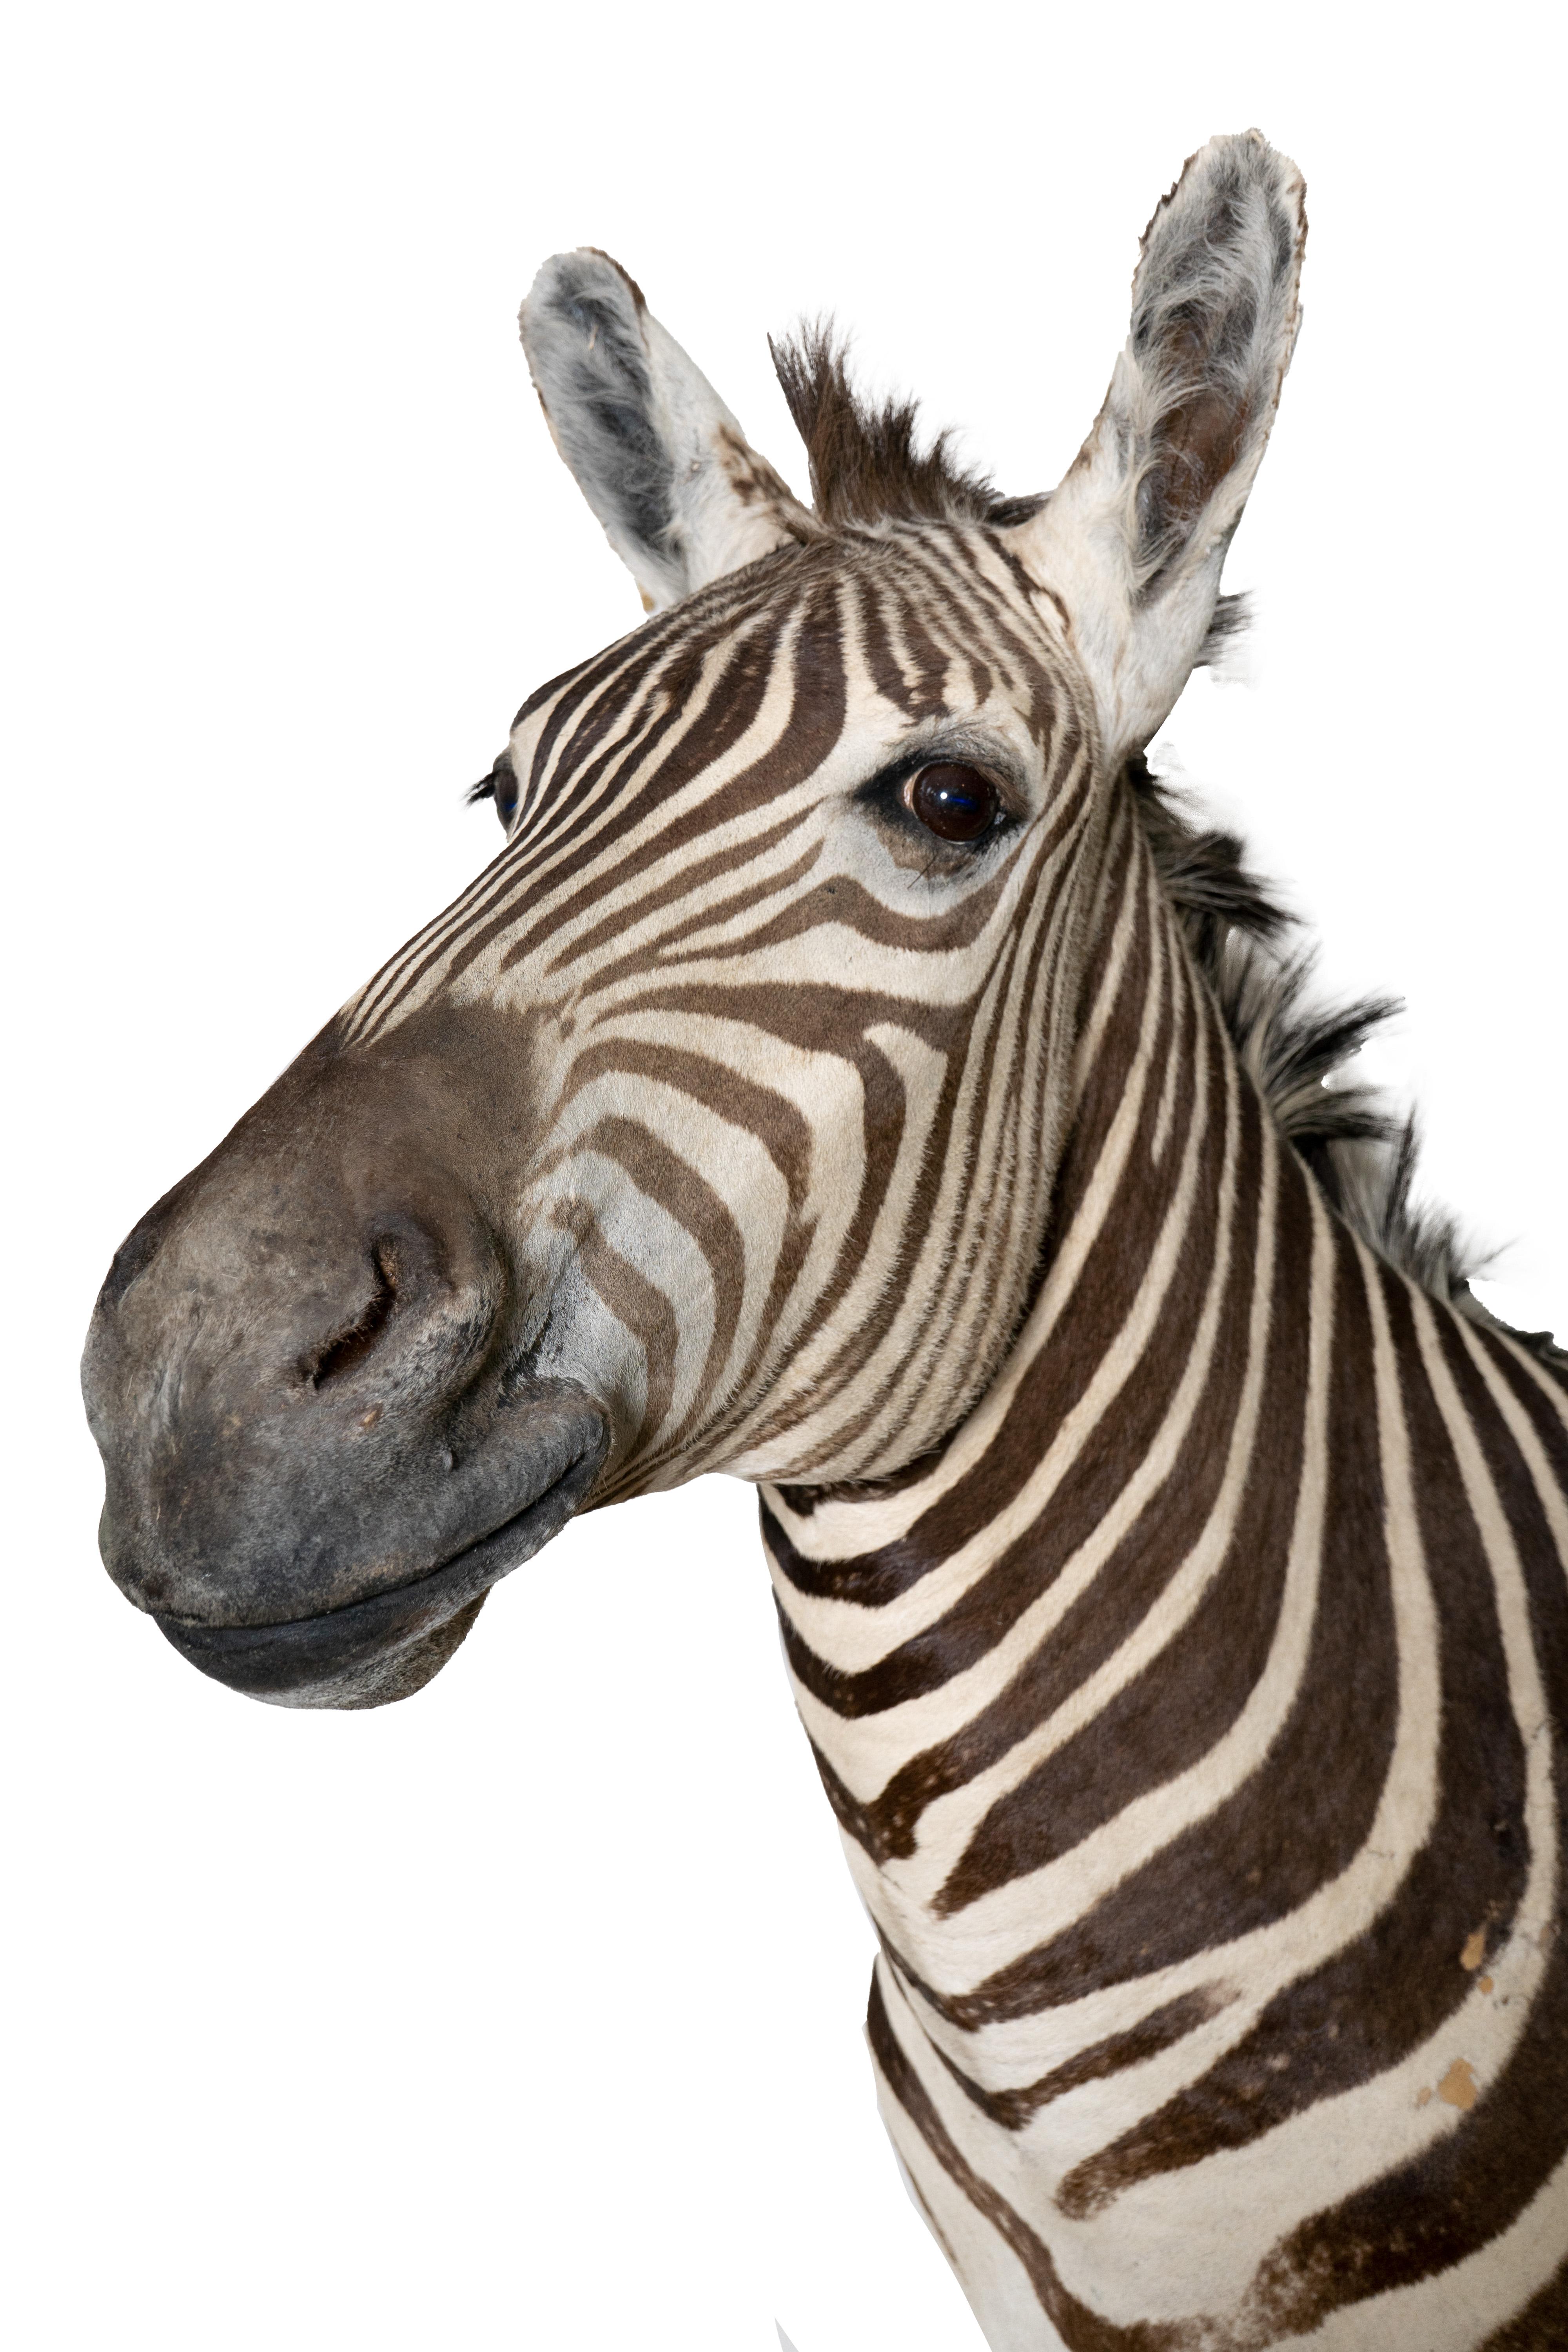 This taxidermy African Zebra Head is a truly impressive piece that captures the beauty and majesty of this iconic animal. Mounted on a white washed wooden rustic column pedestal, this piece is a work of art that is sure to become a centerpiece of